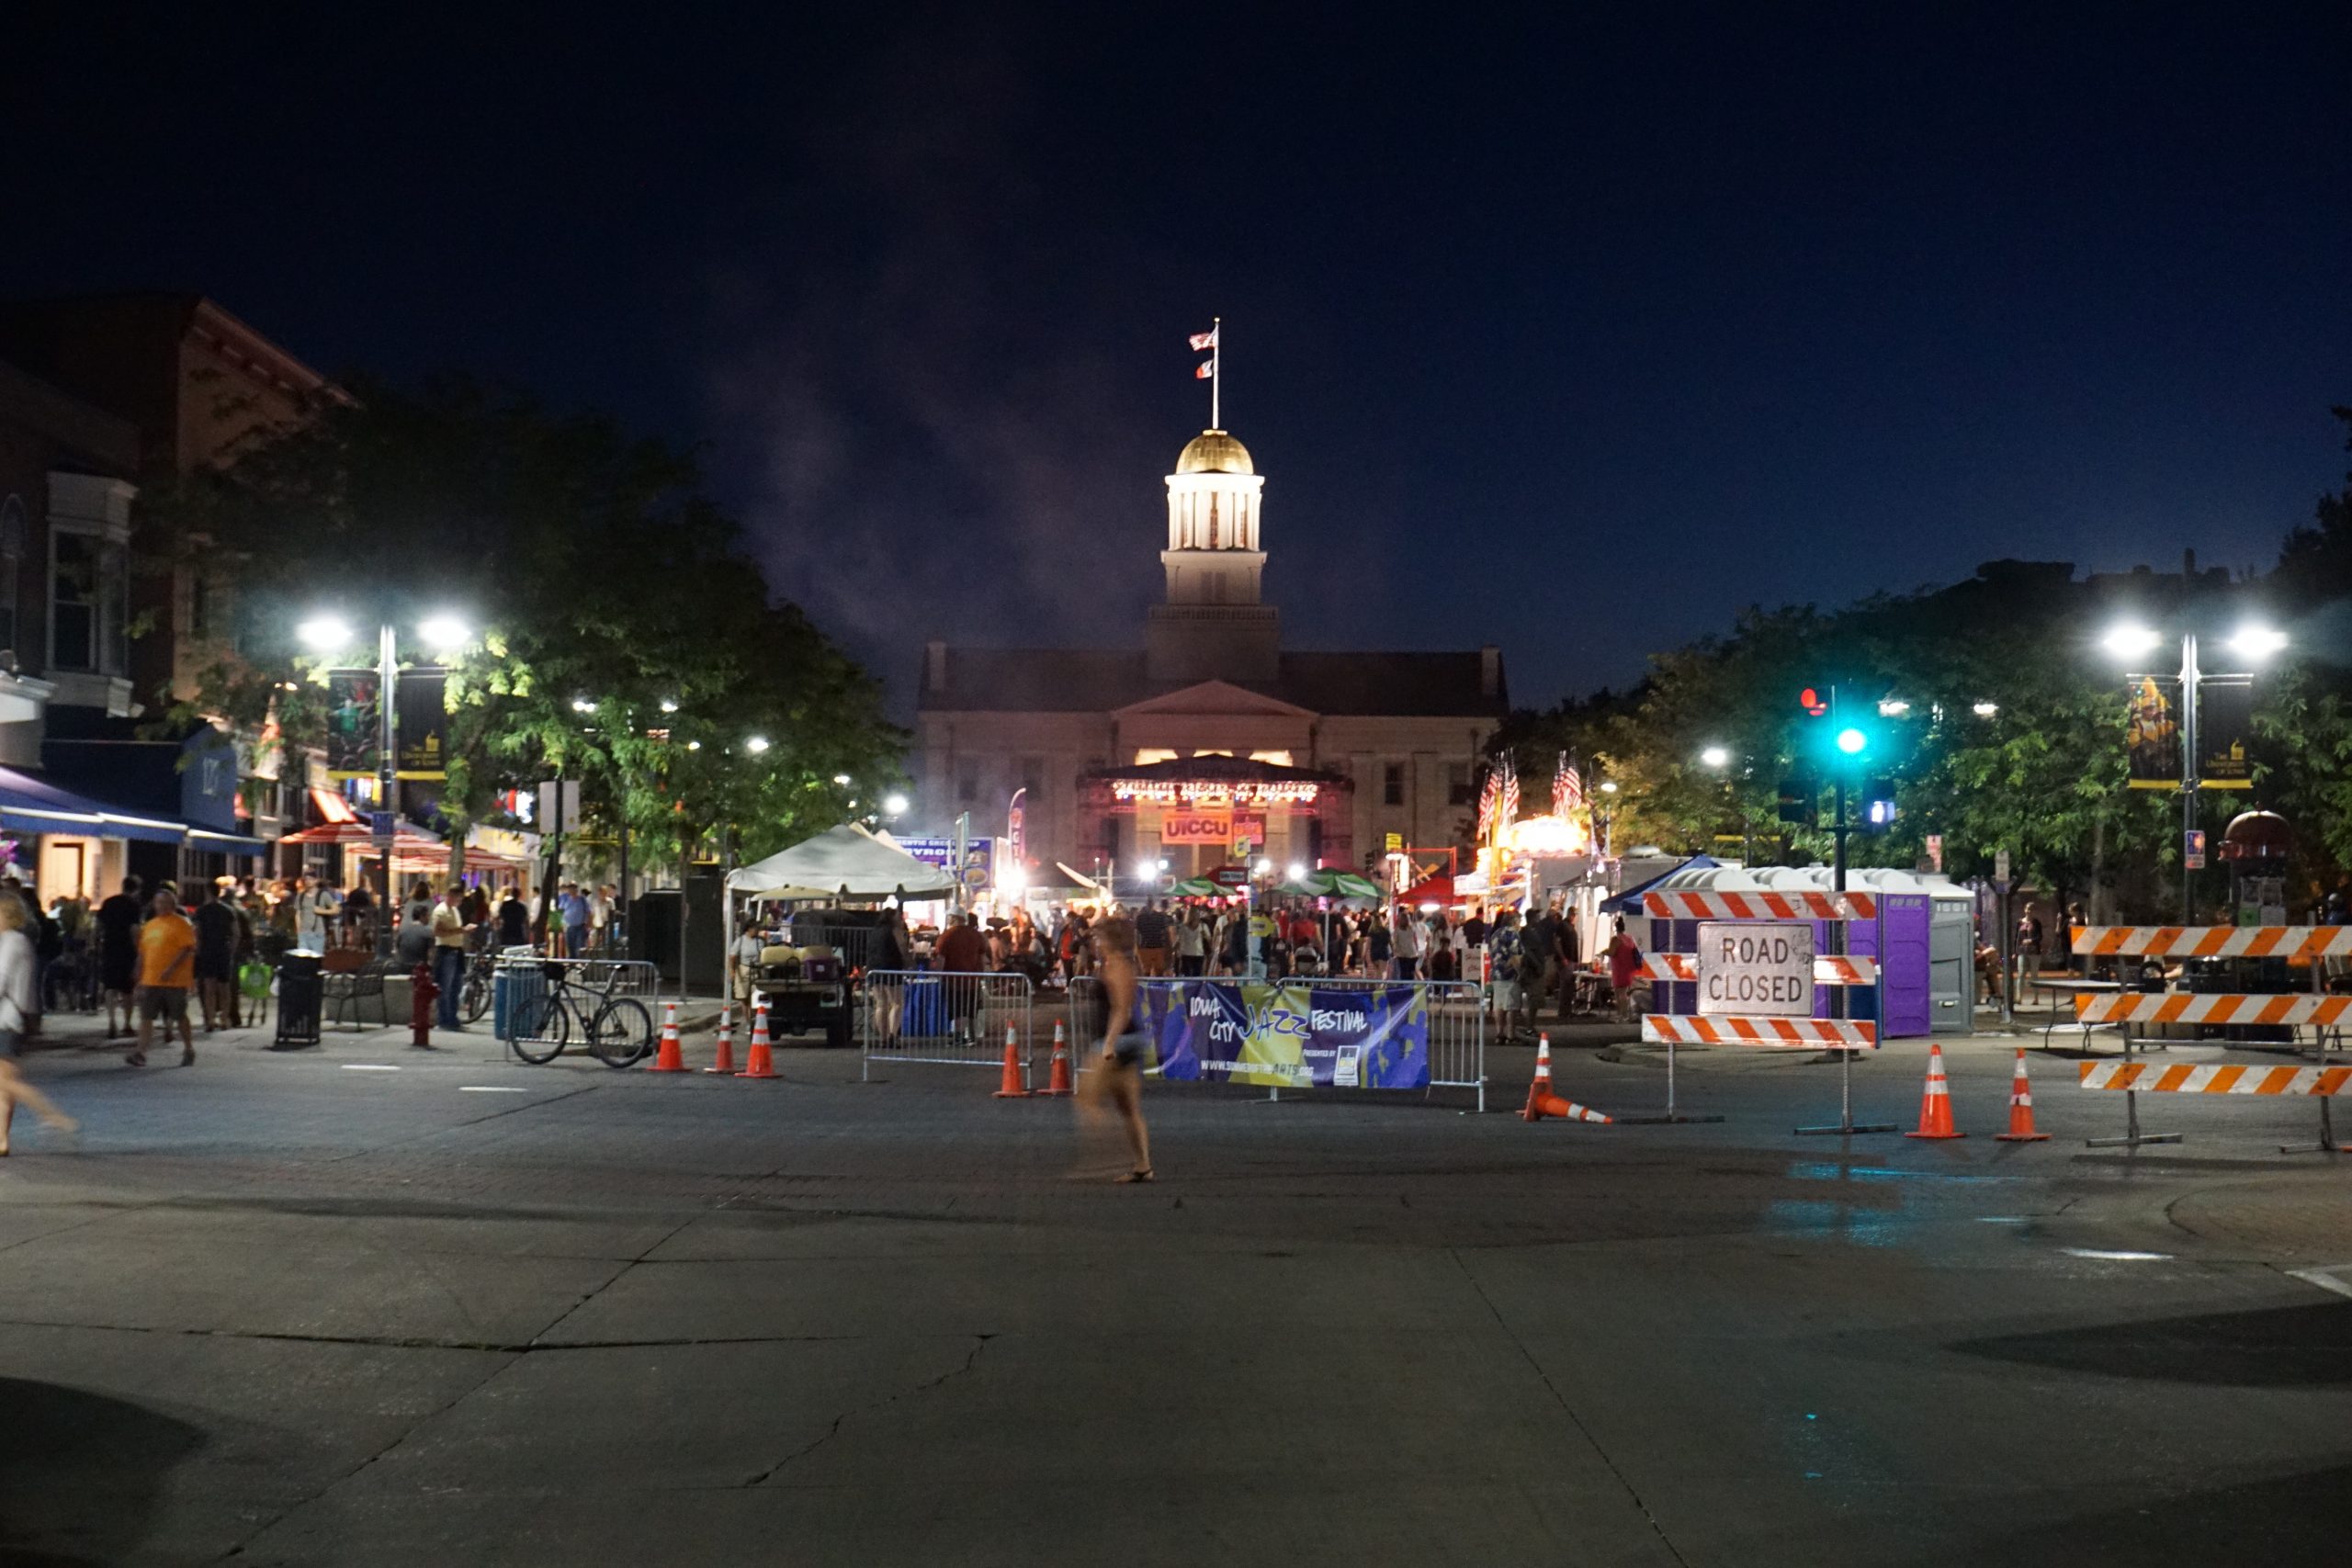 View of concession stand area at the 2017 Iowa City Jazz Festival by the Ped Mall